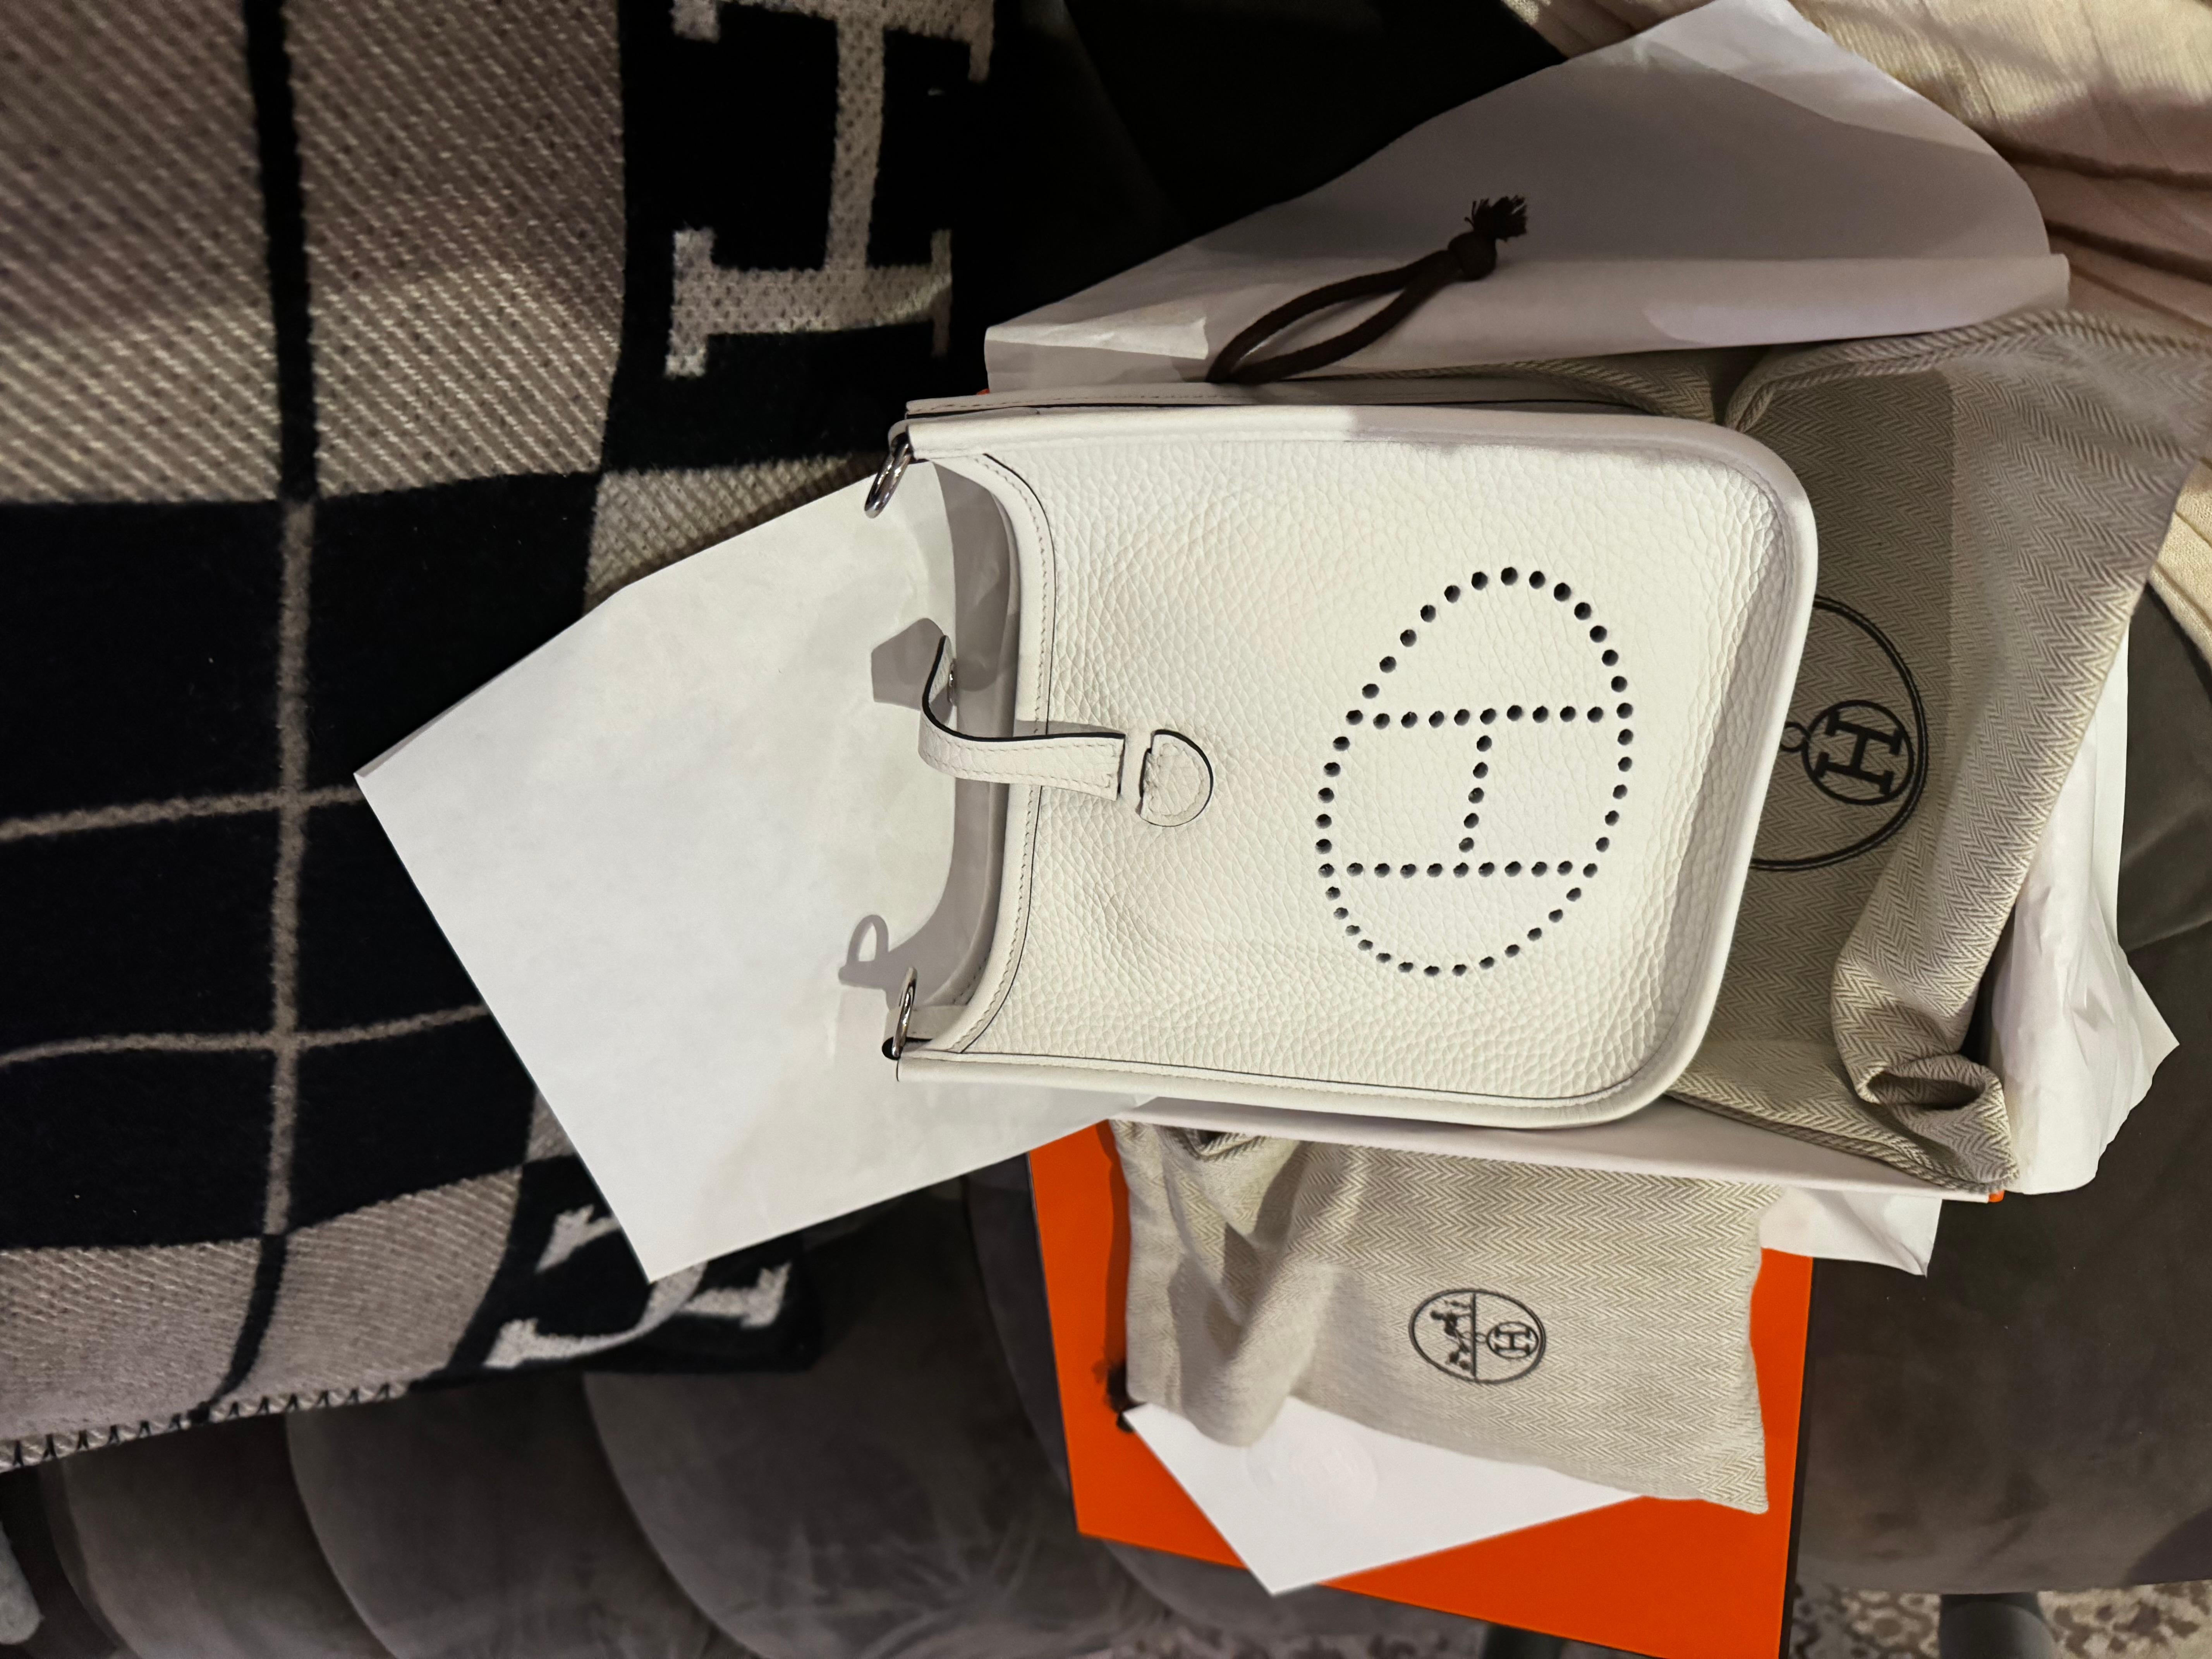 Hermes mini Evelyne bag in New White colour and palladium hardware. Comes with a crossbody canvas strap, dustbags and box as from the shop. B stamp end of 2023.